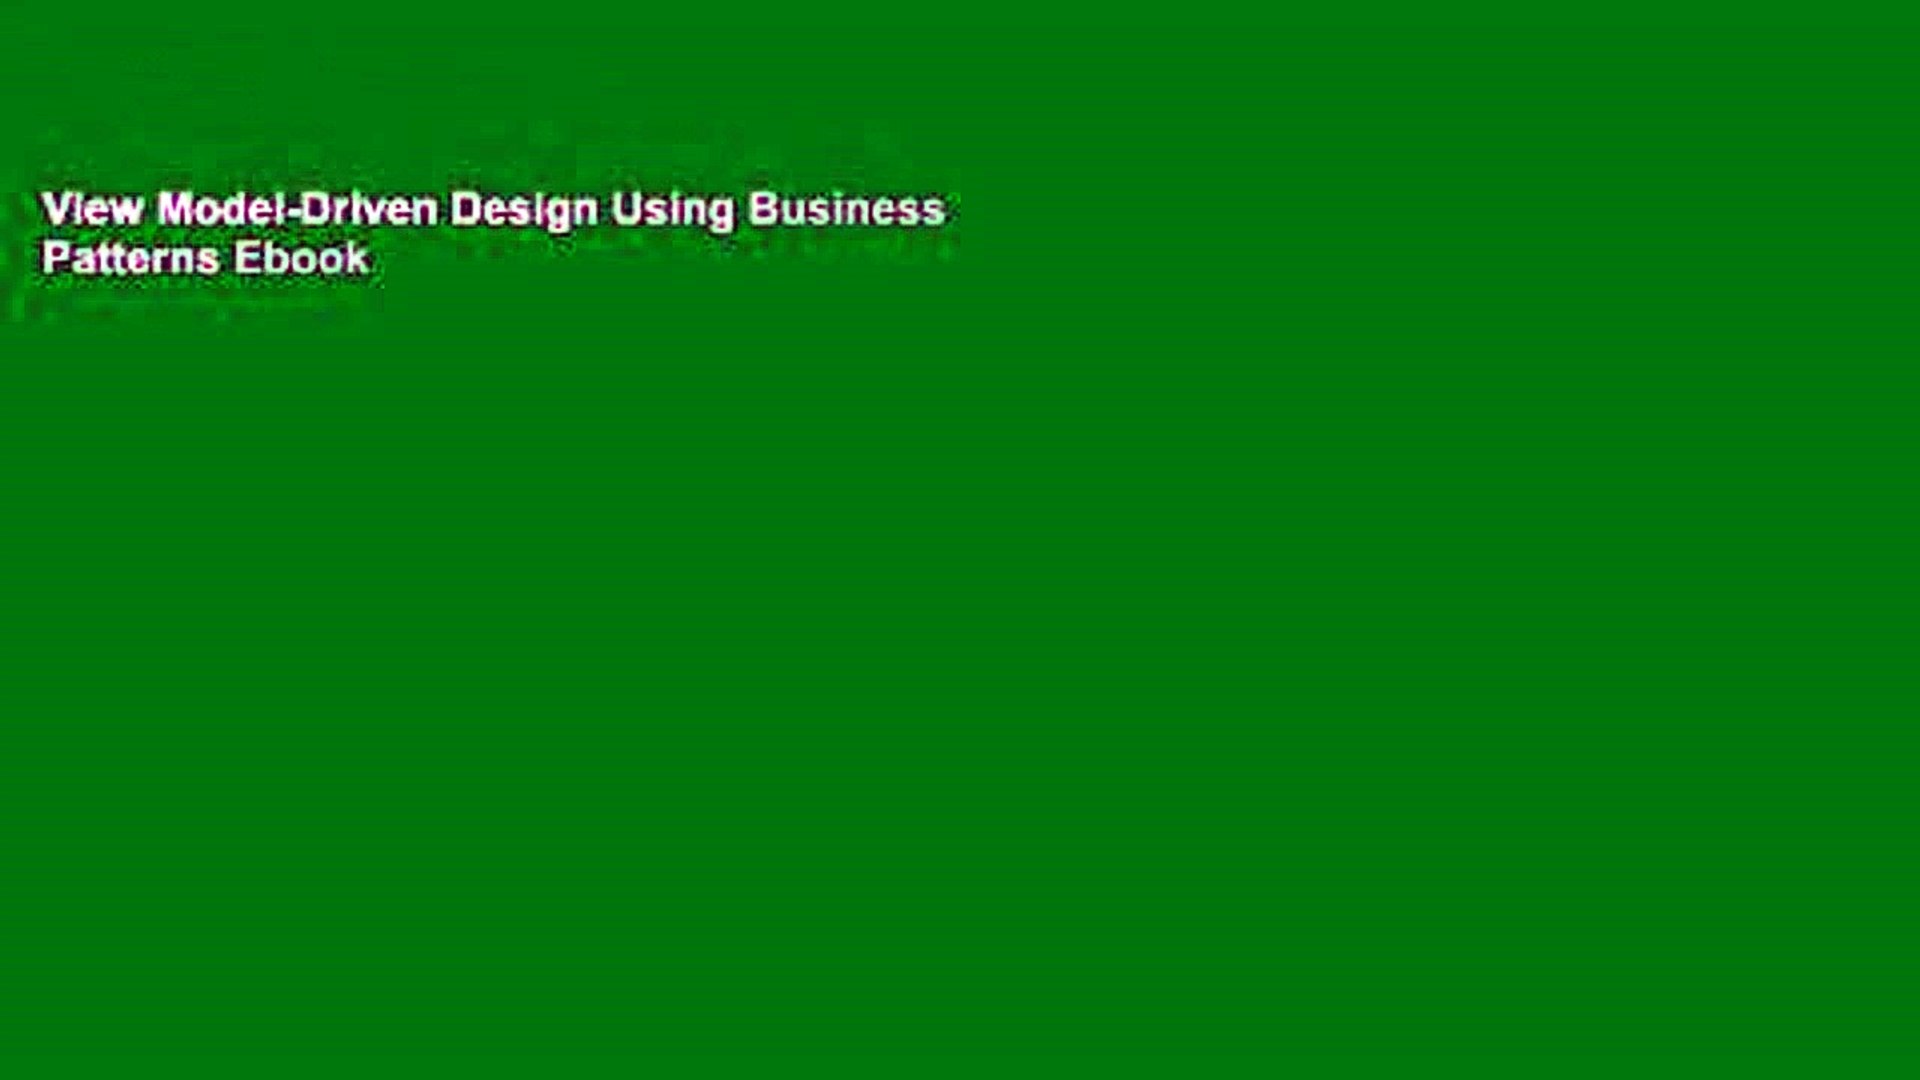 View Model-Driven Design Using Business Patterns Ebook